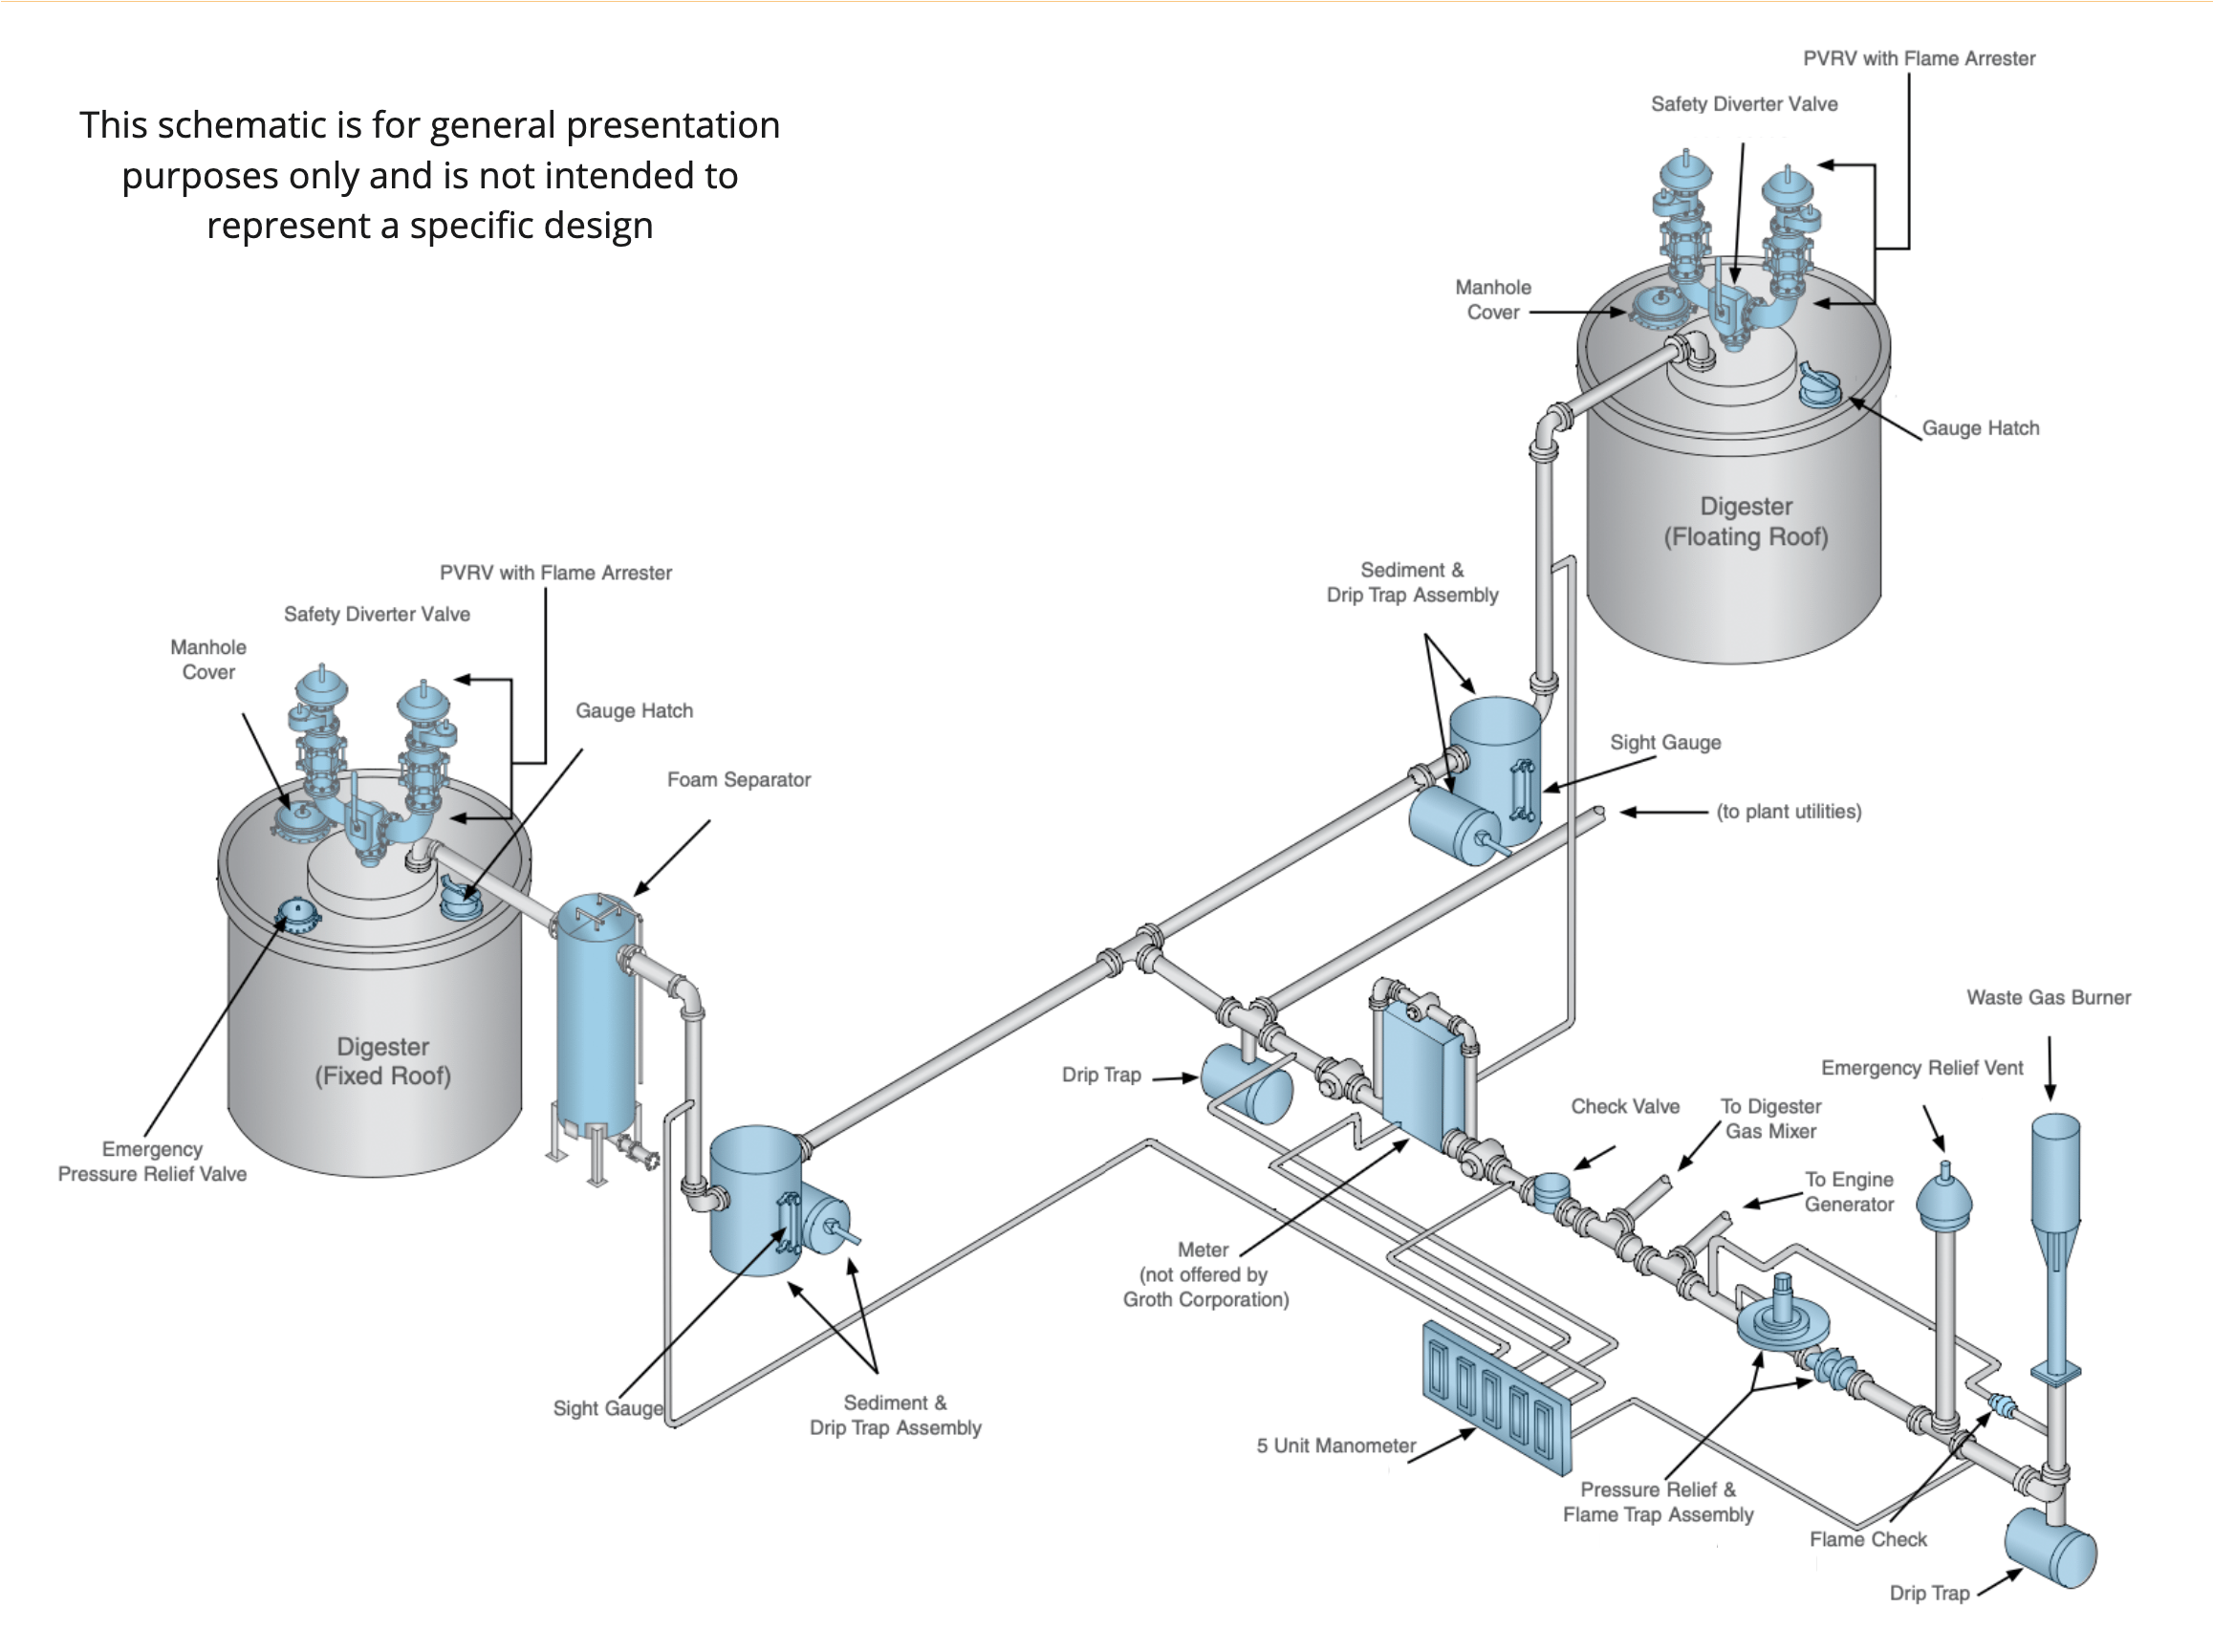 Wastewater Biogas Safety and Control Equipment